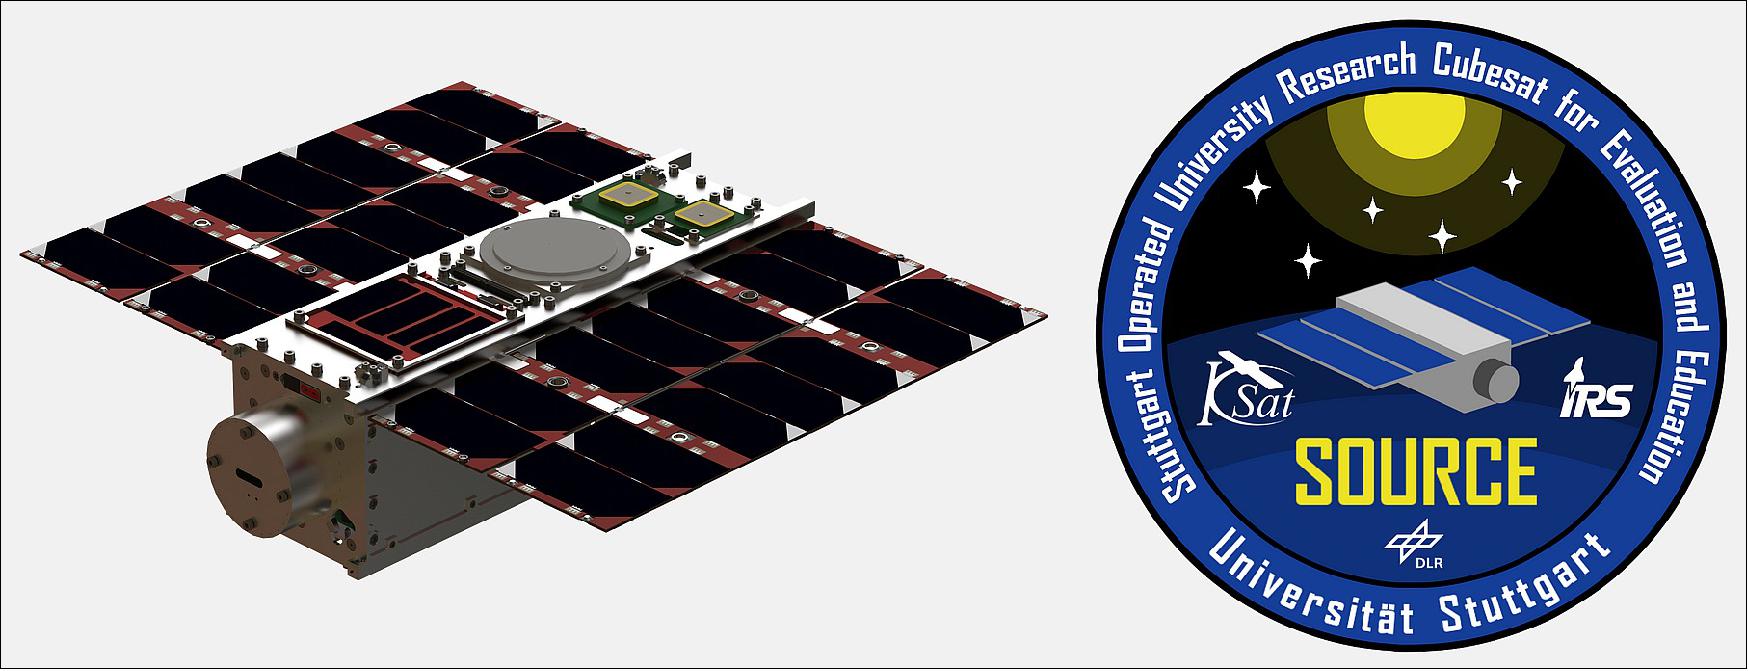 Figure 1: Overview of the SOURCE CubeSat and logo of main project participants (image credit: University of Stuttgart)